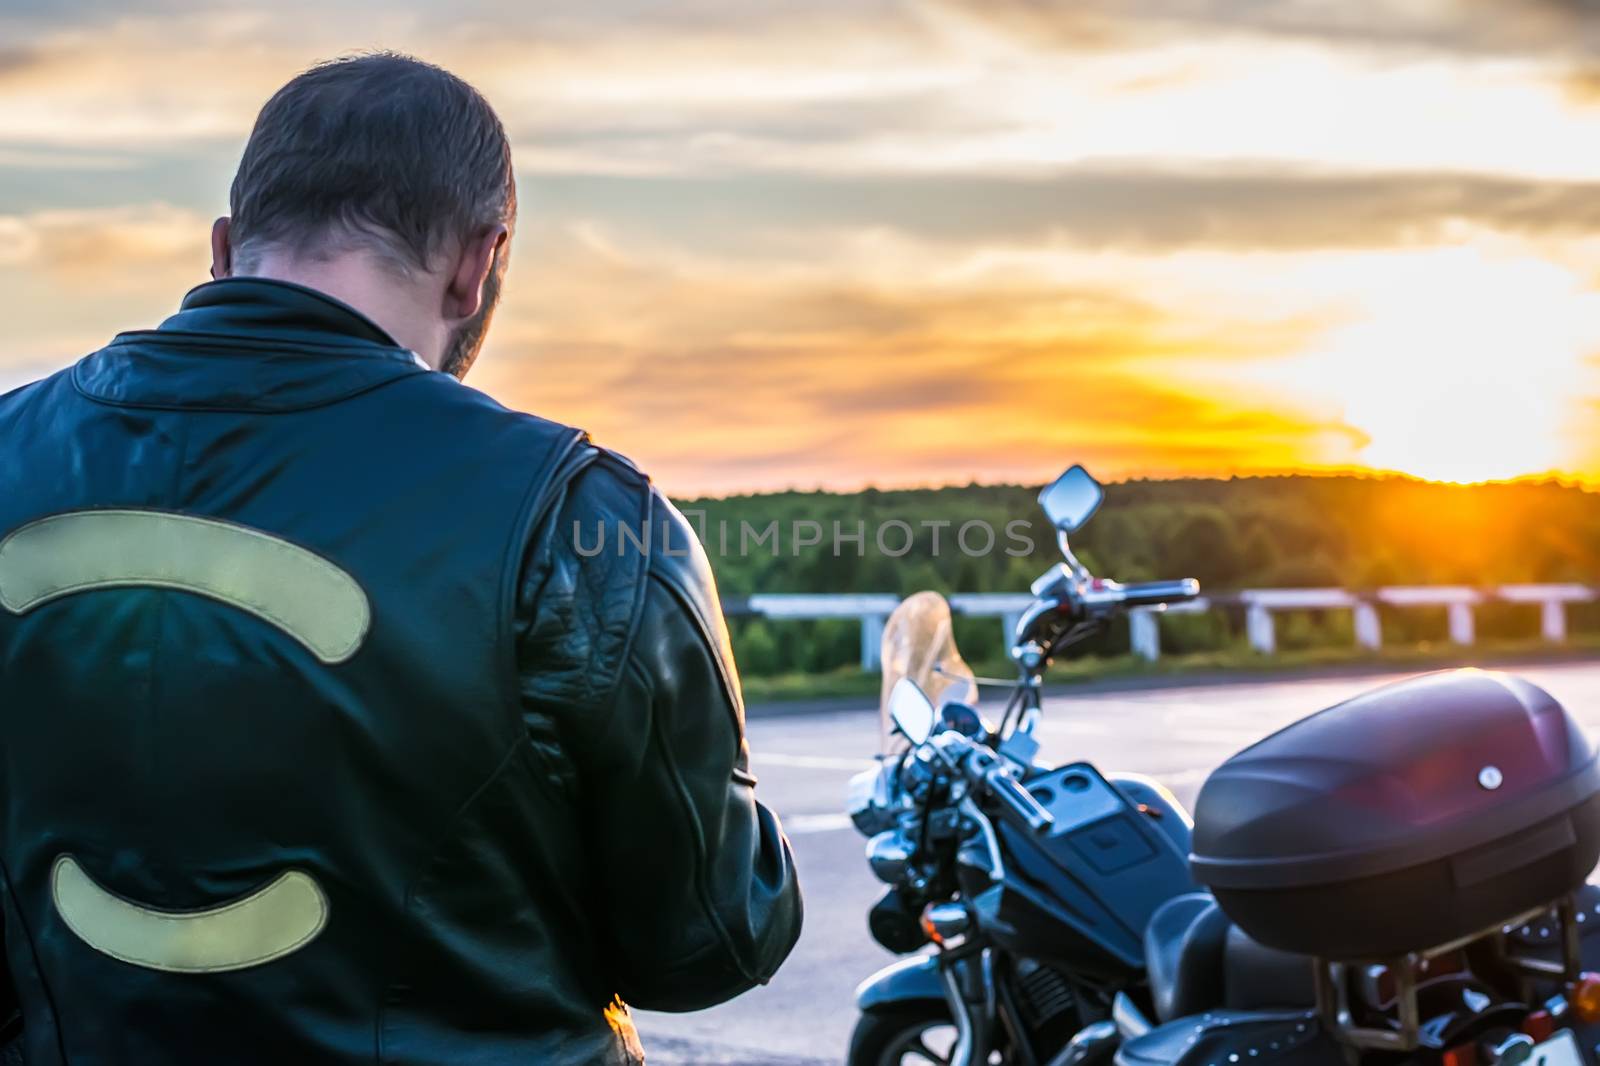 biker in a leather jacket standing next to the motorbike on the background at sunset